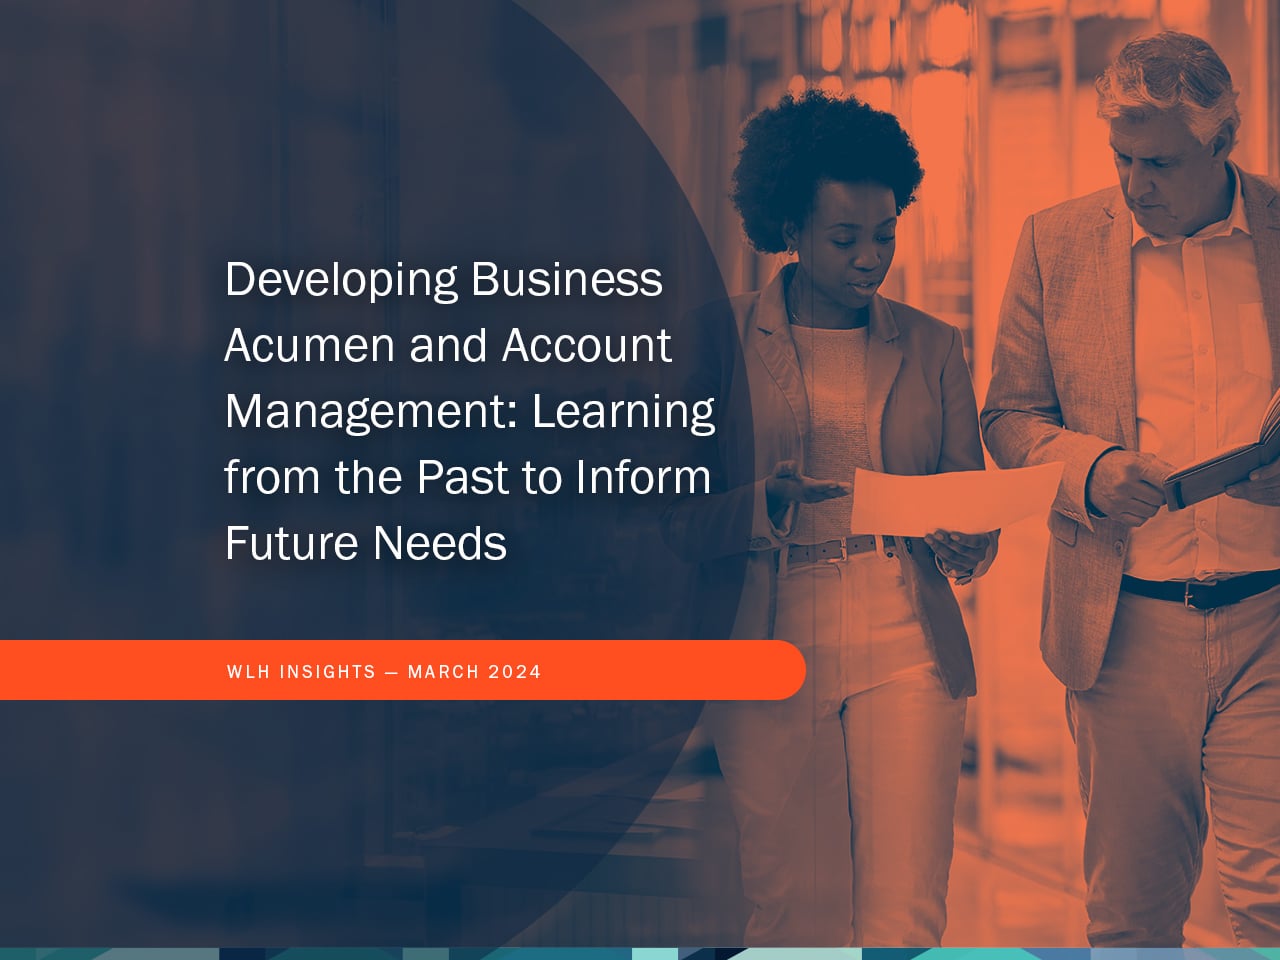 Developing Business Acumen and Account Management: Learning from the Past to Inform Future Needs